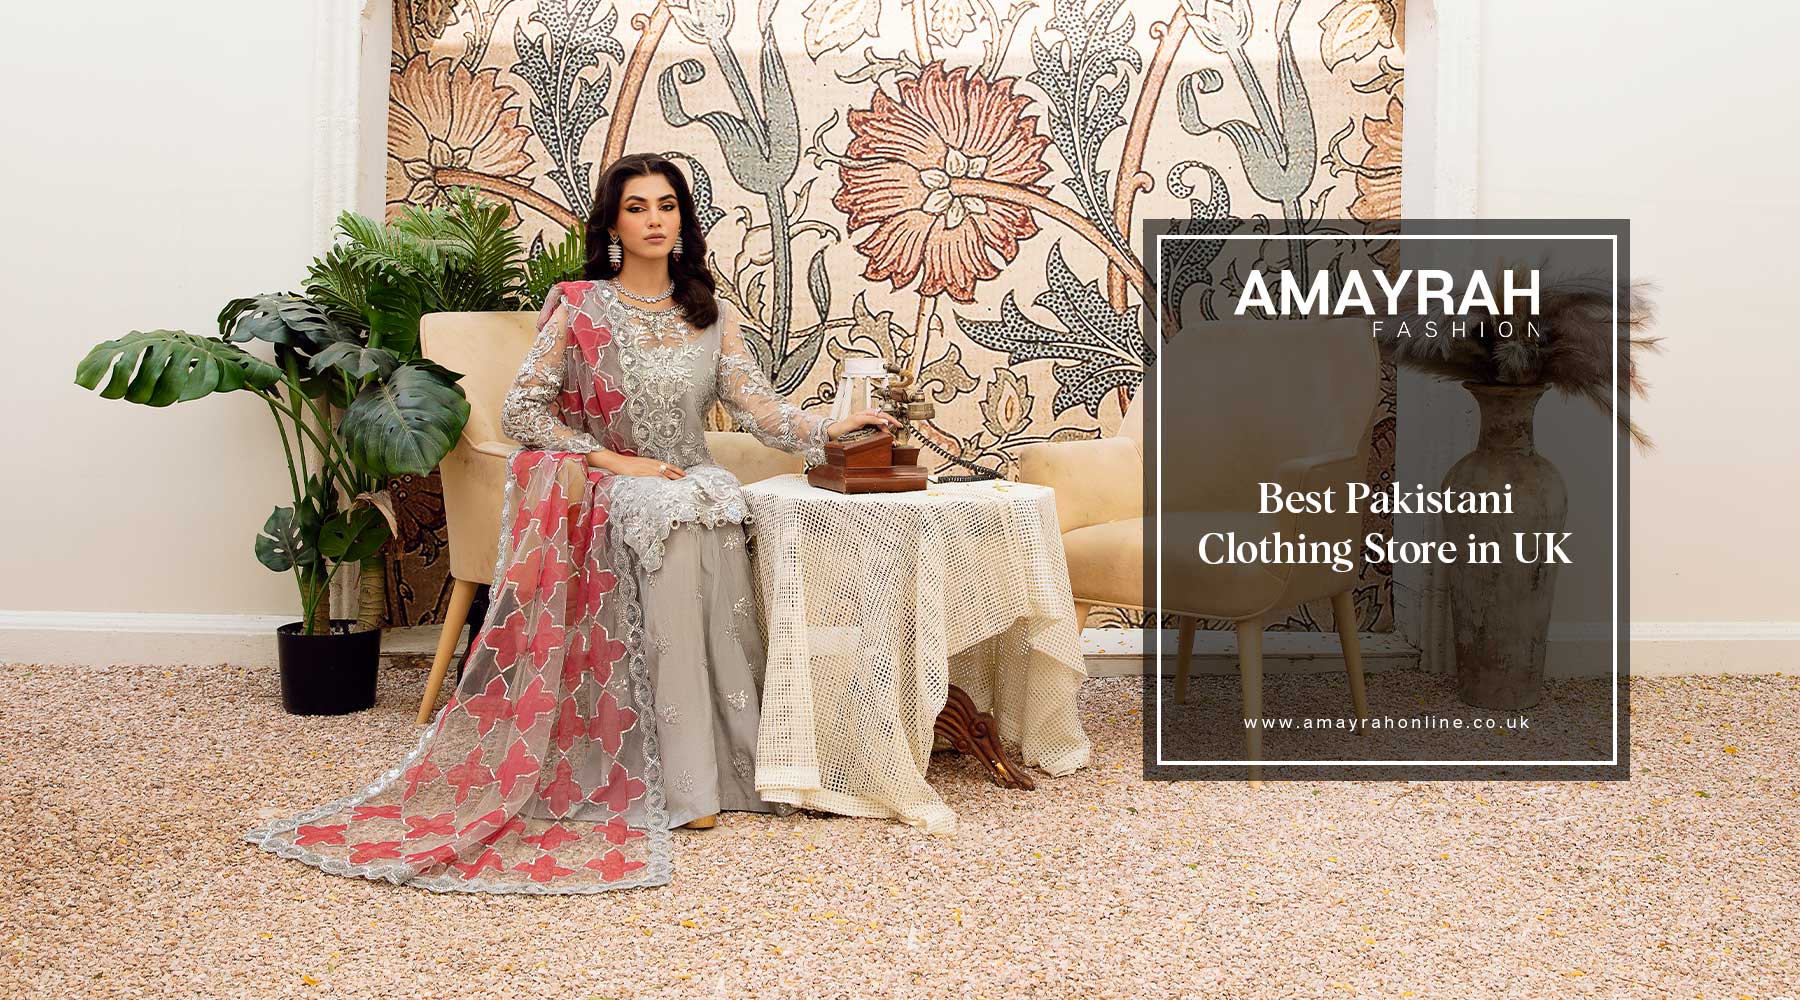 Discover the Best Pakistani Clothing Store in the UK: Amayrah Fashion